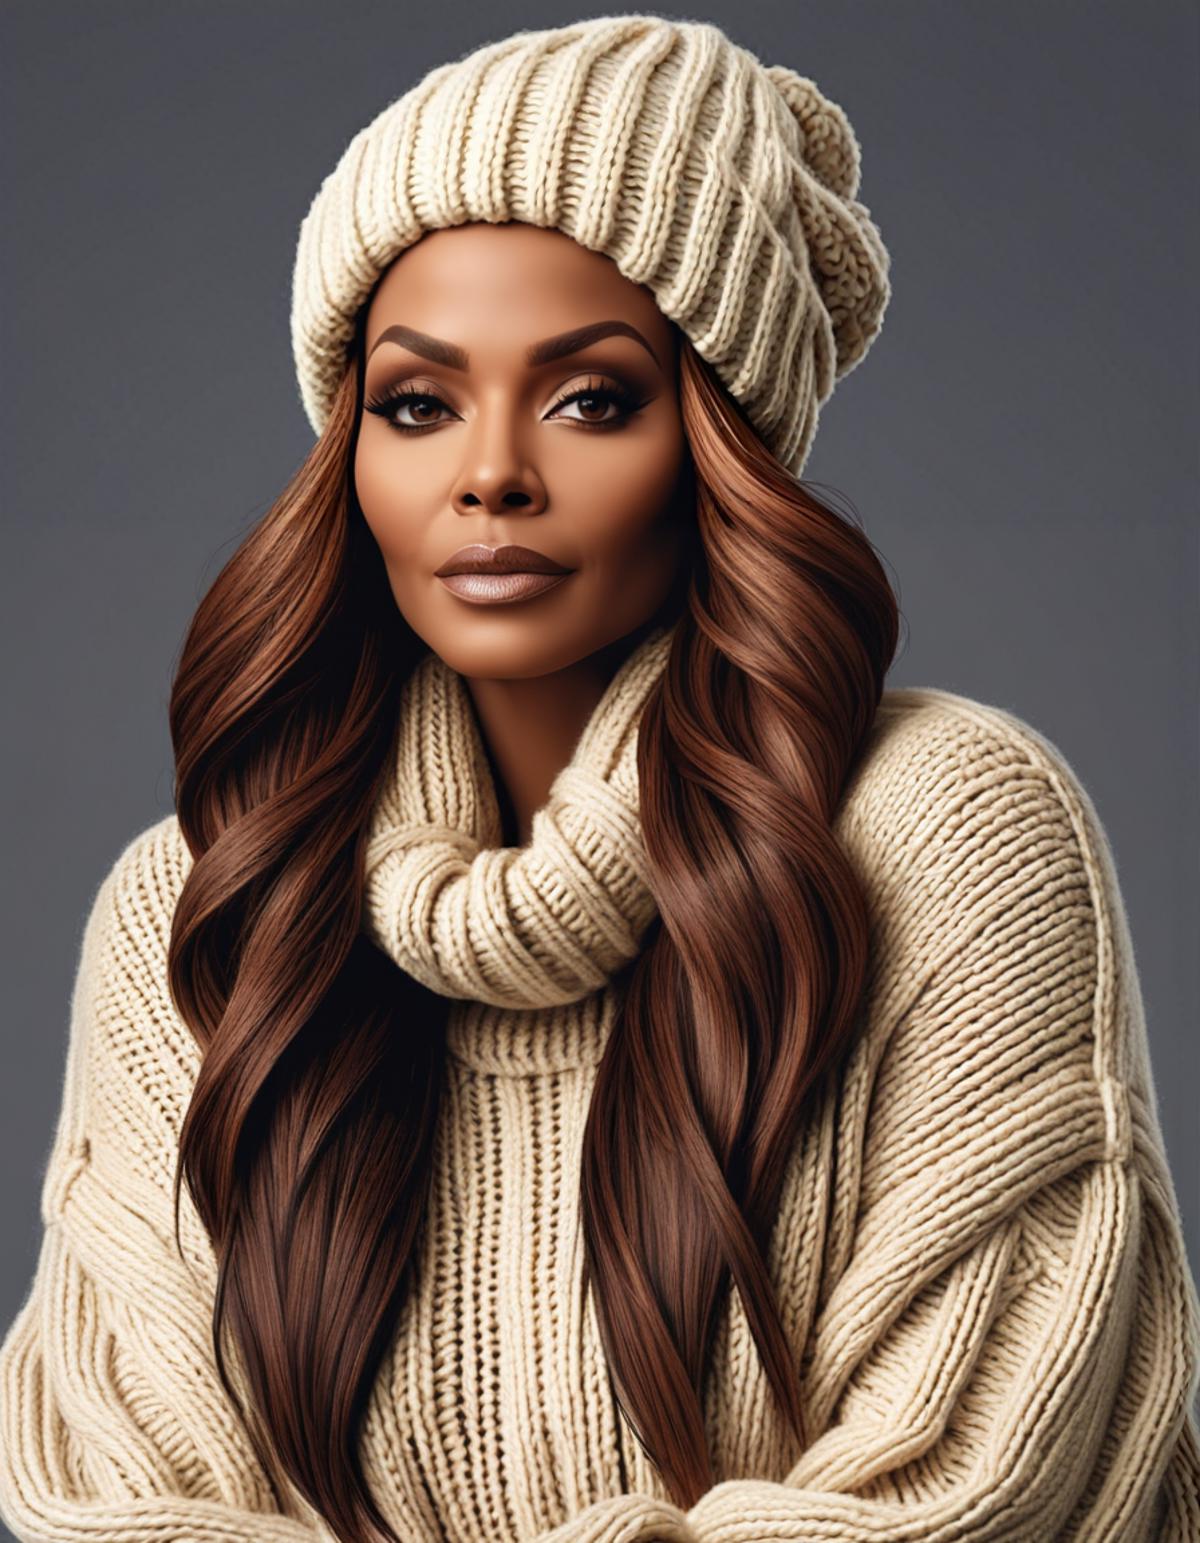 A beautiful woman wearing a white sweater and a knitted cap.